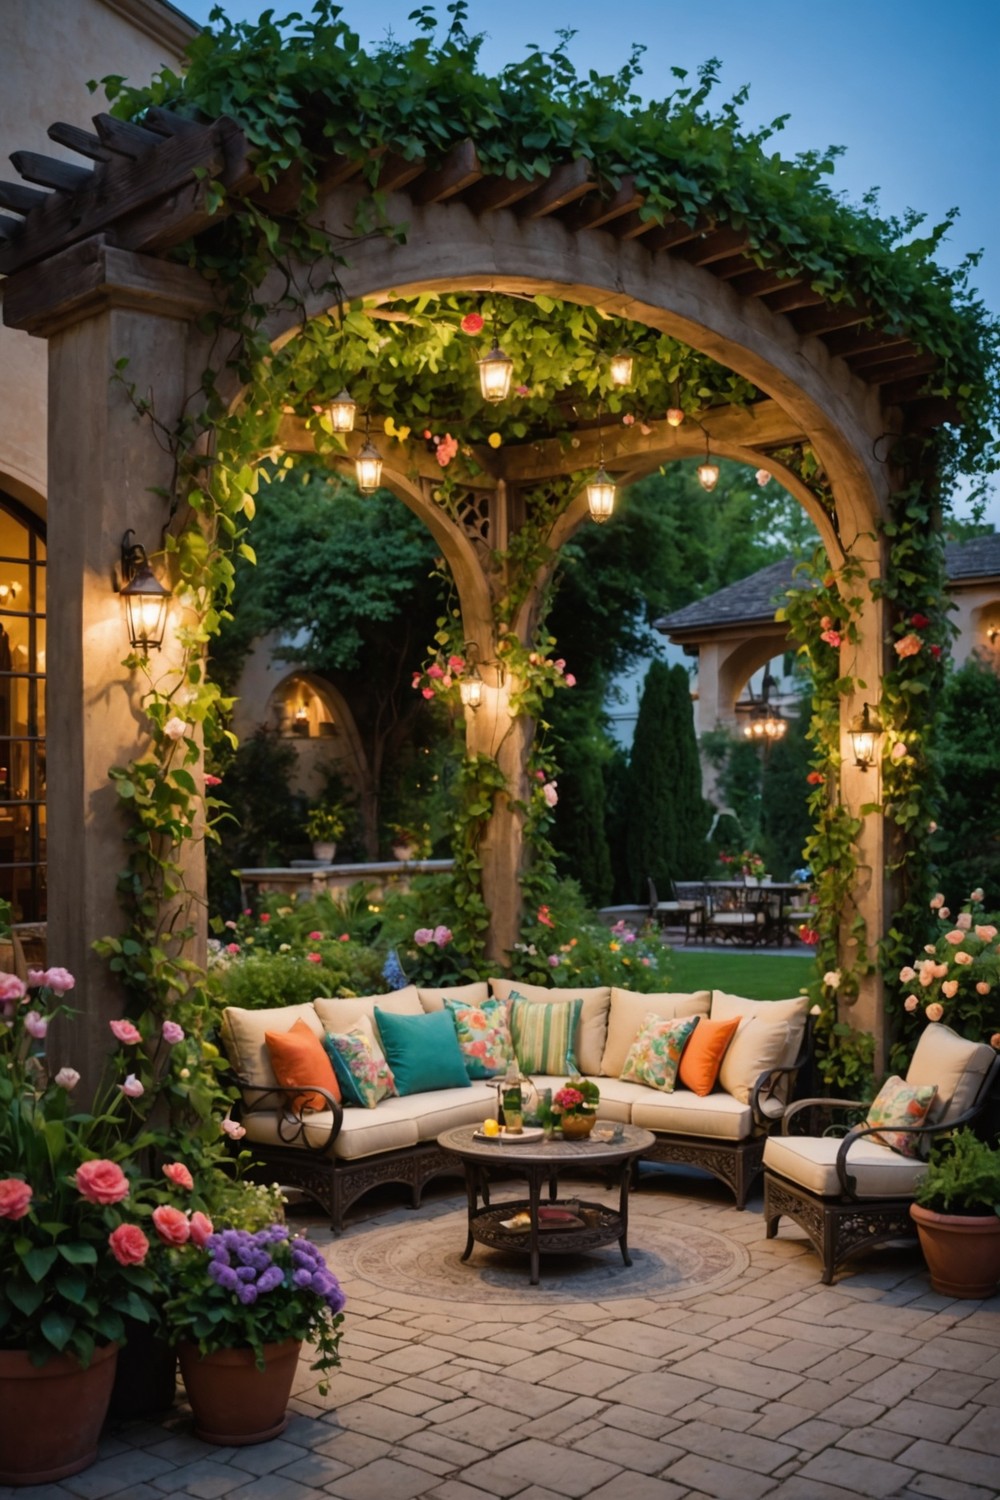 Corner Pergola with Fanciful Arches